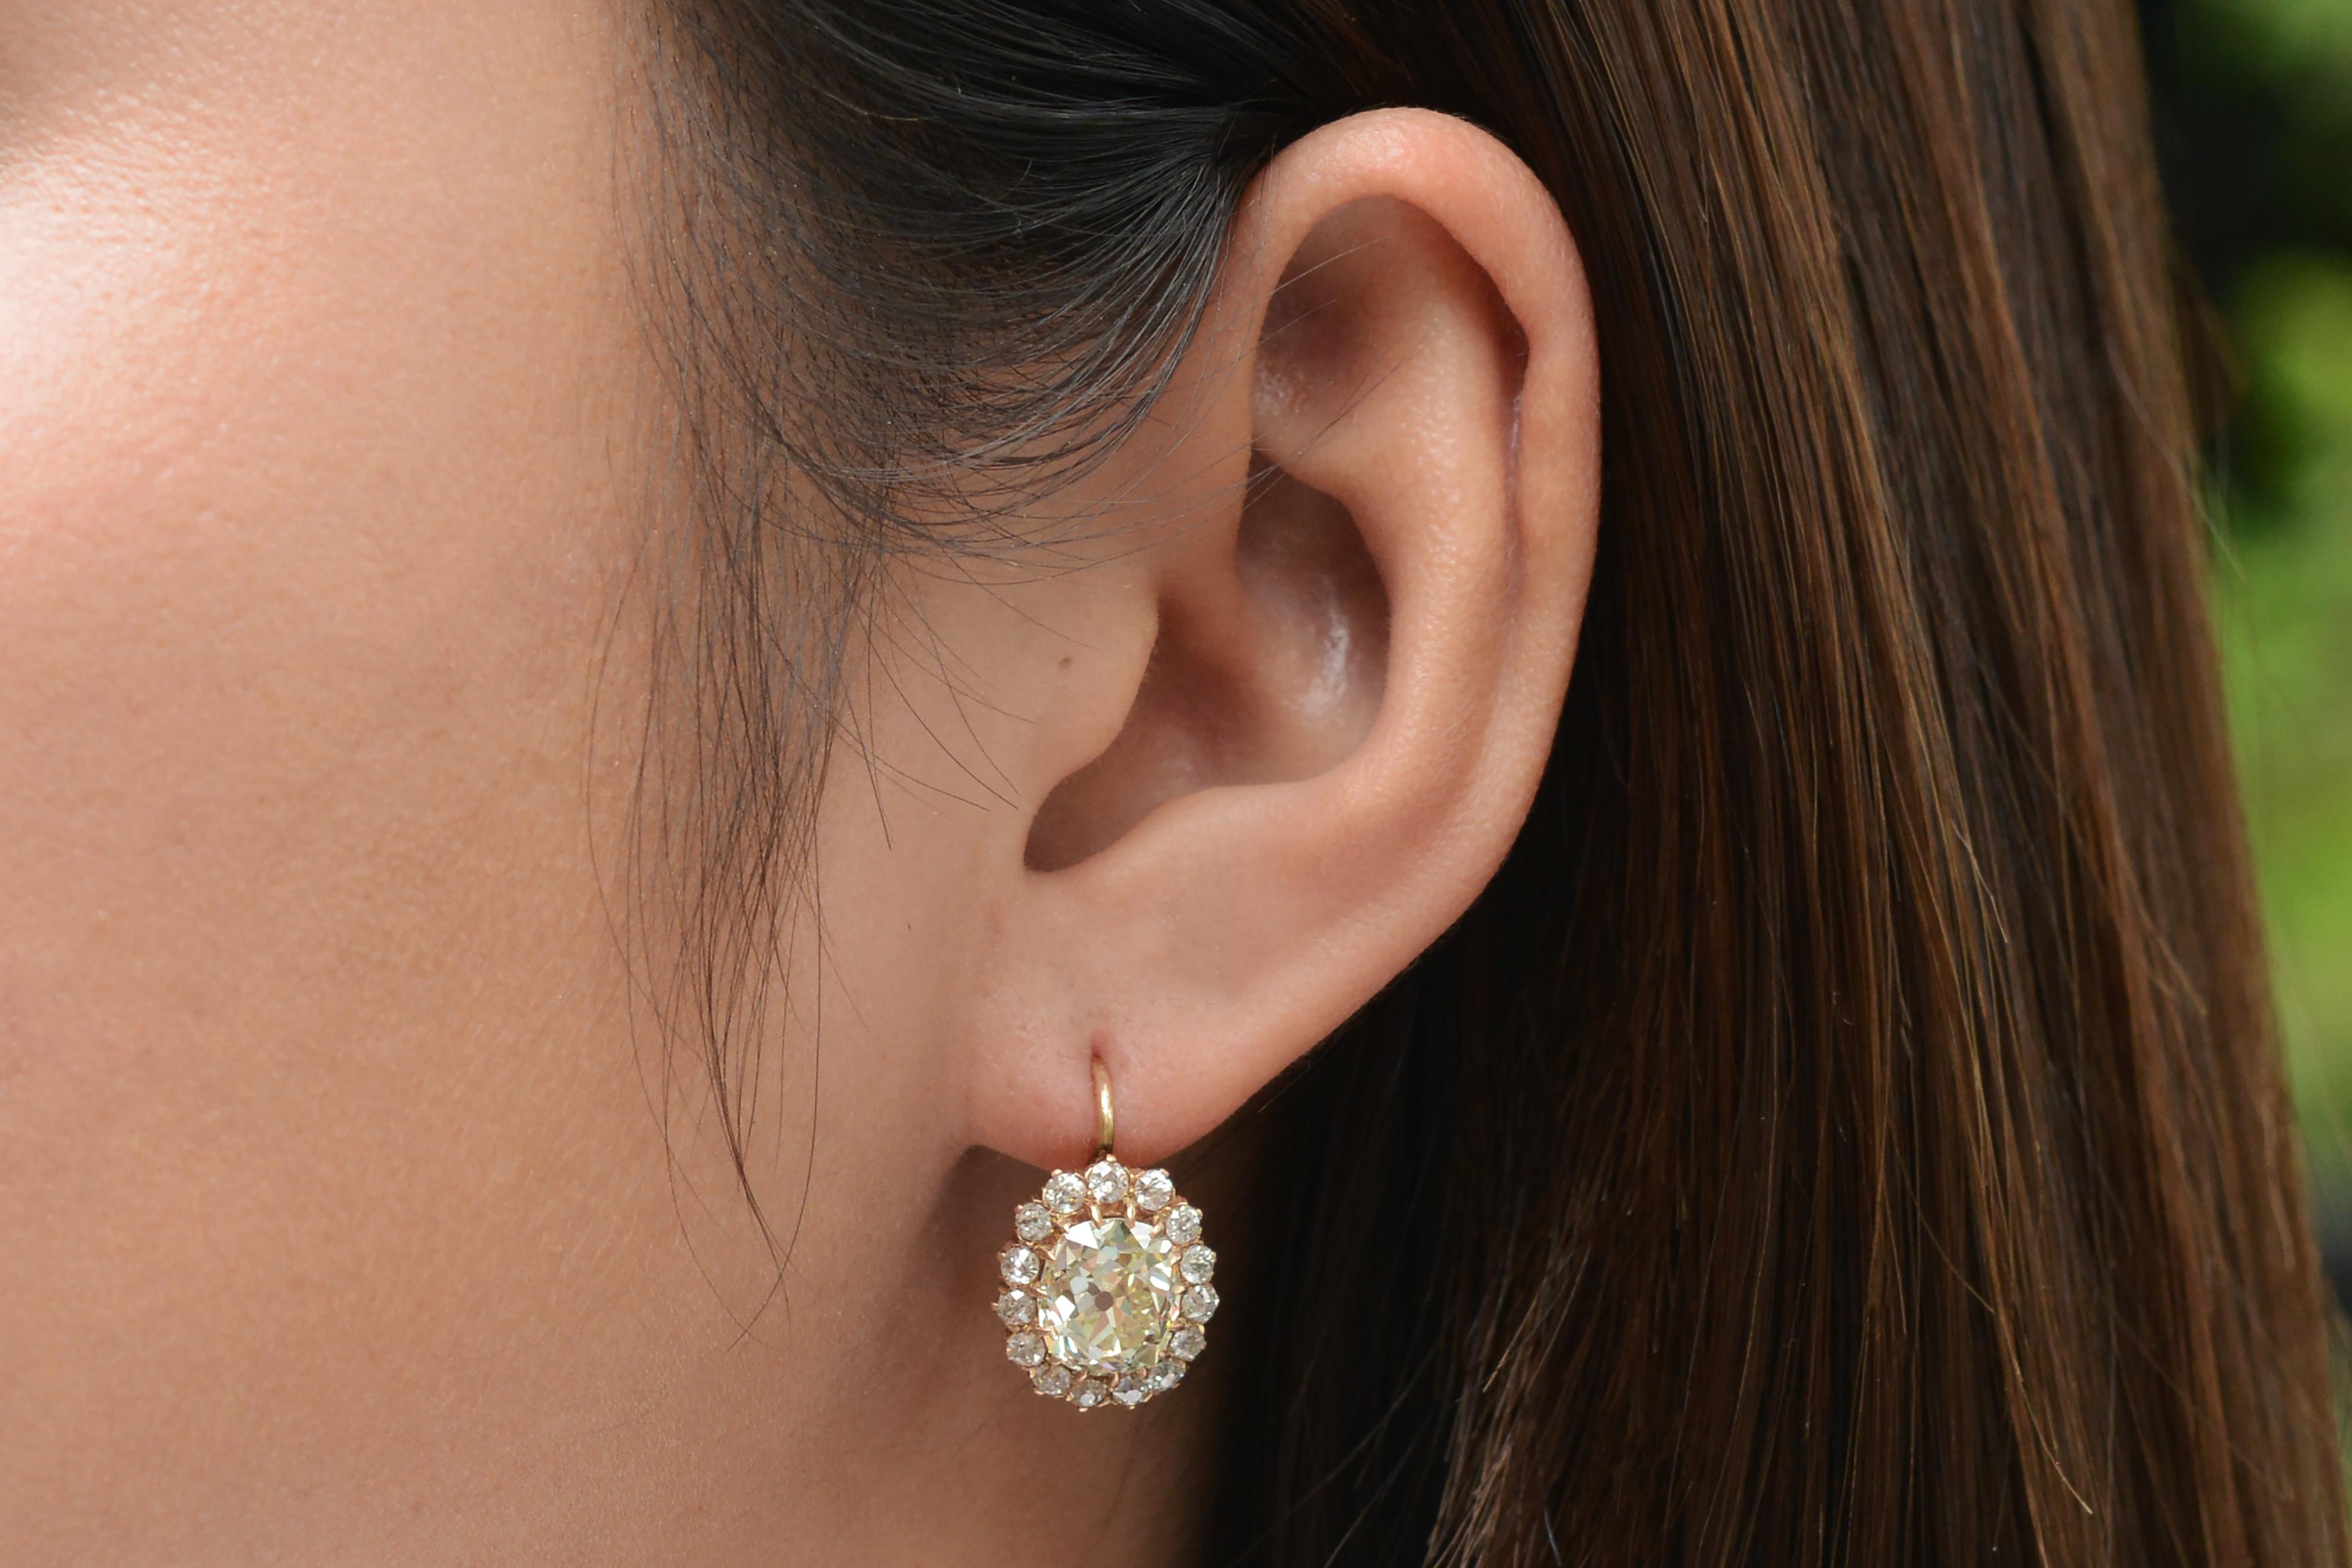 It truly is love at first sight with this phenomenal pair of 5 carat antique old mine cut diamond lever-back earrings. In each one sits an over 2 carat antique cushion cut diamond that was cut with a foot powered treadle using thorough care and